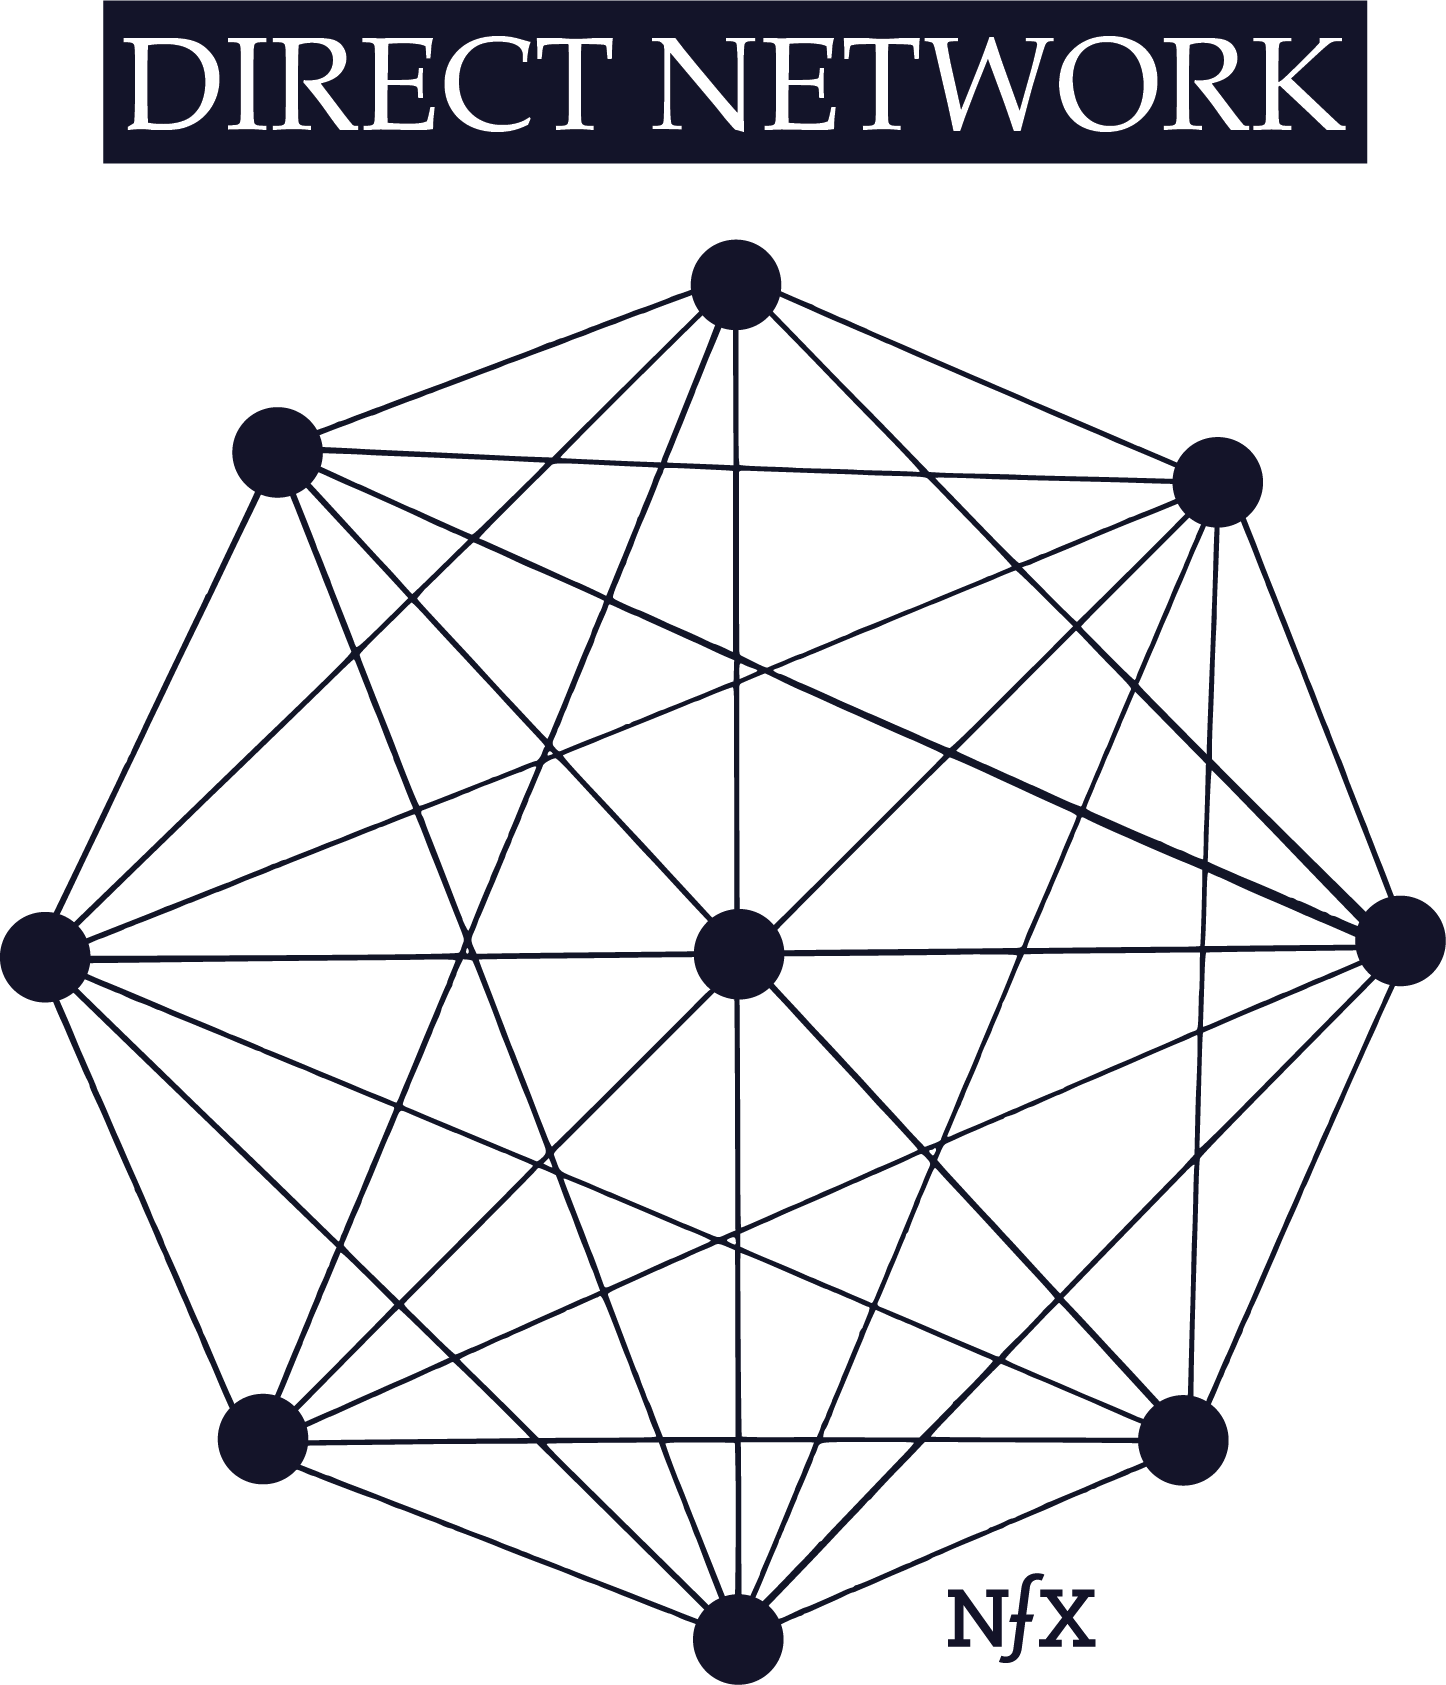 Direct Network